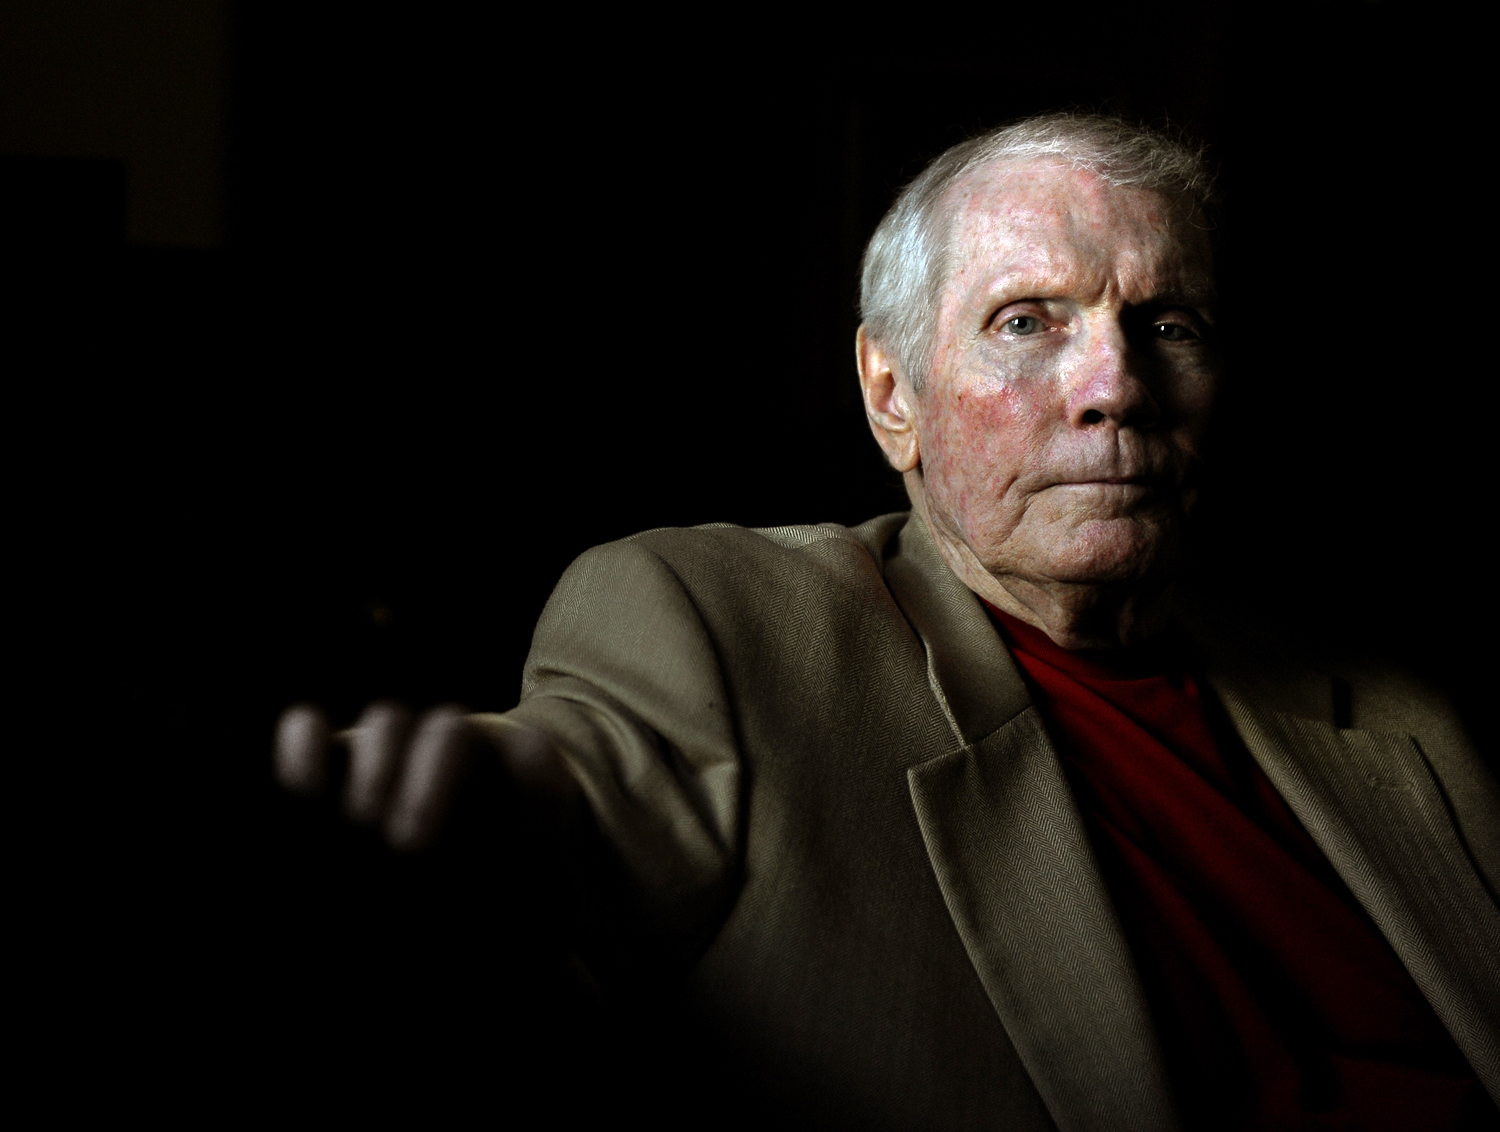 The Rev. Fred Phelps leads the controversial Westboro Baptist Church.